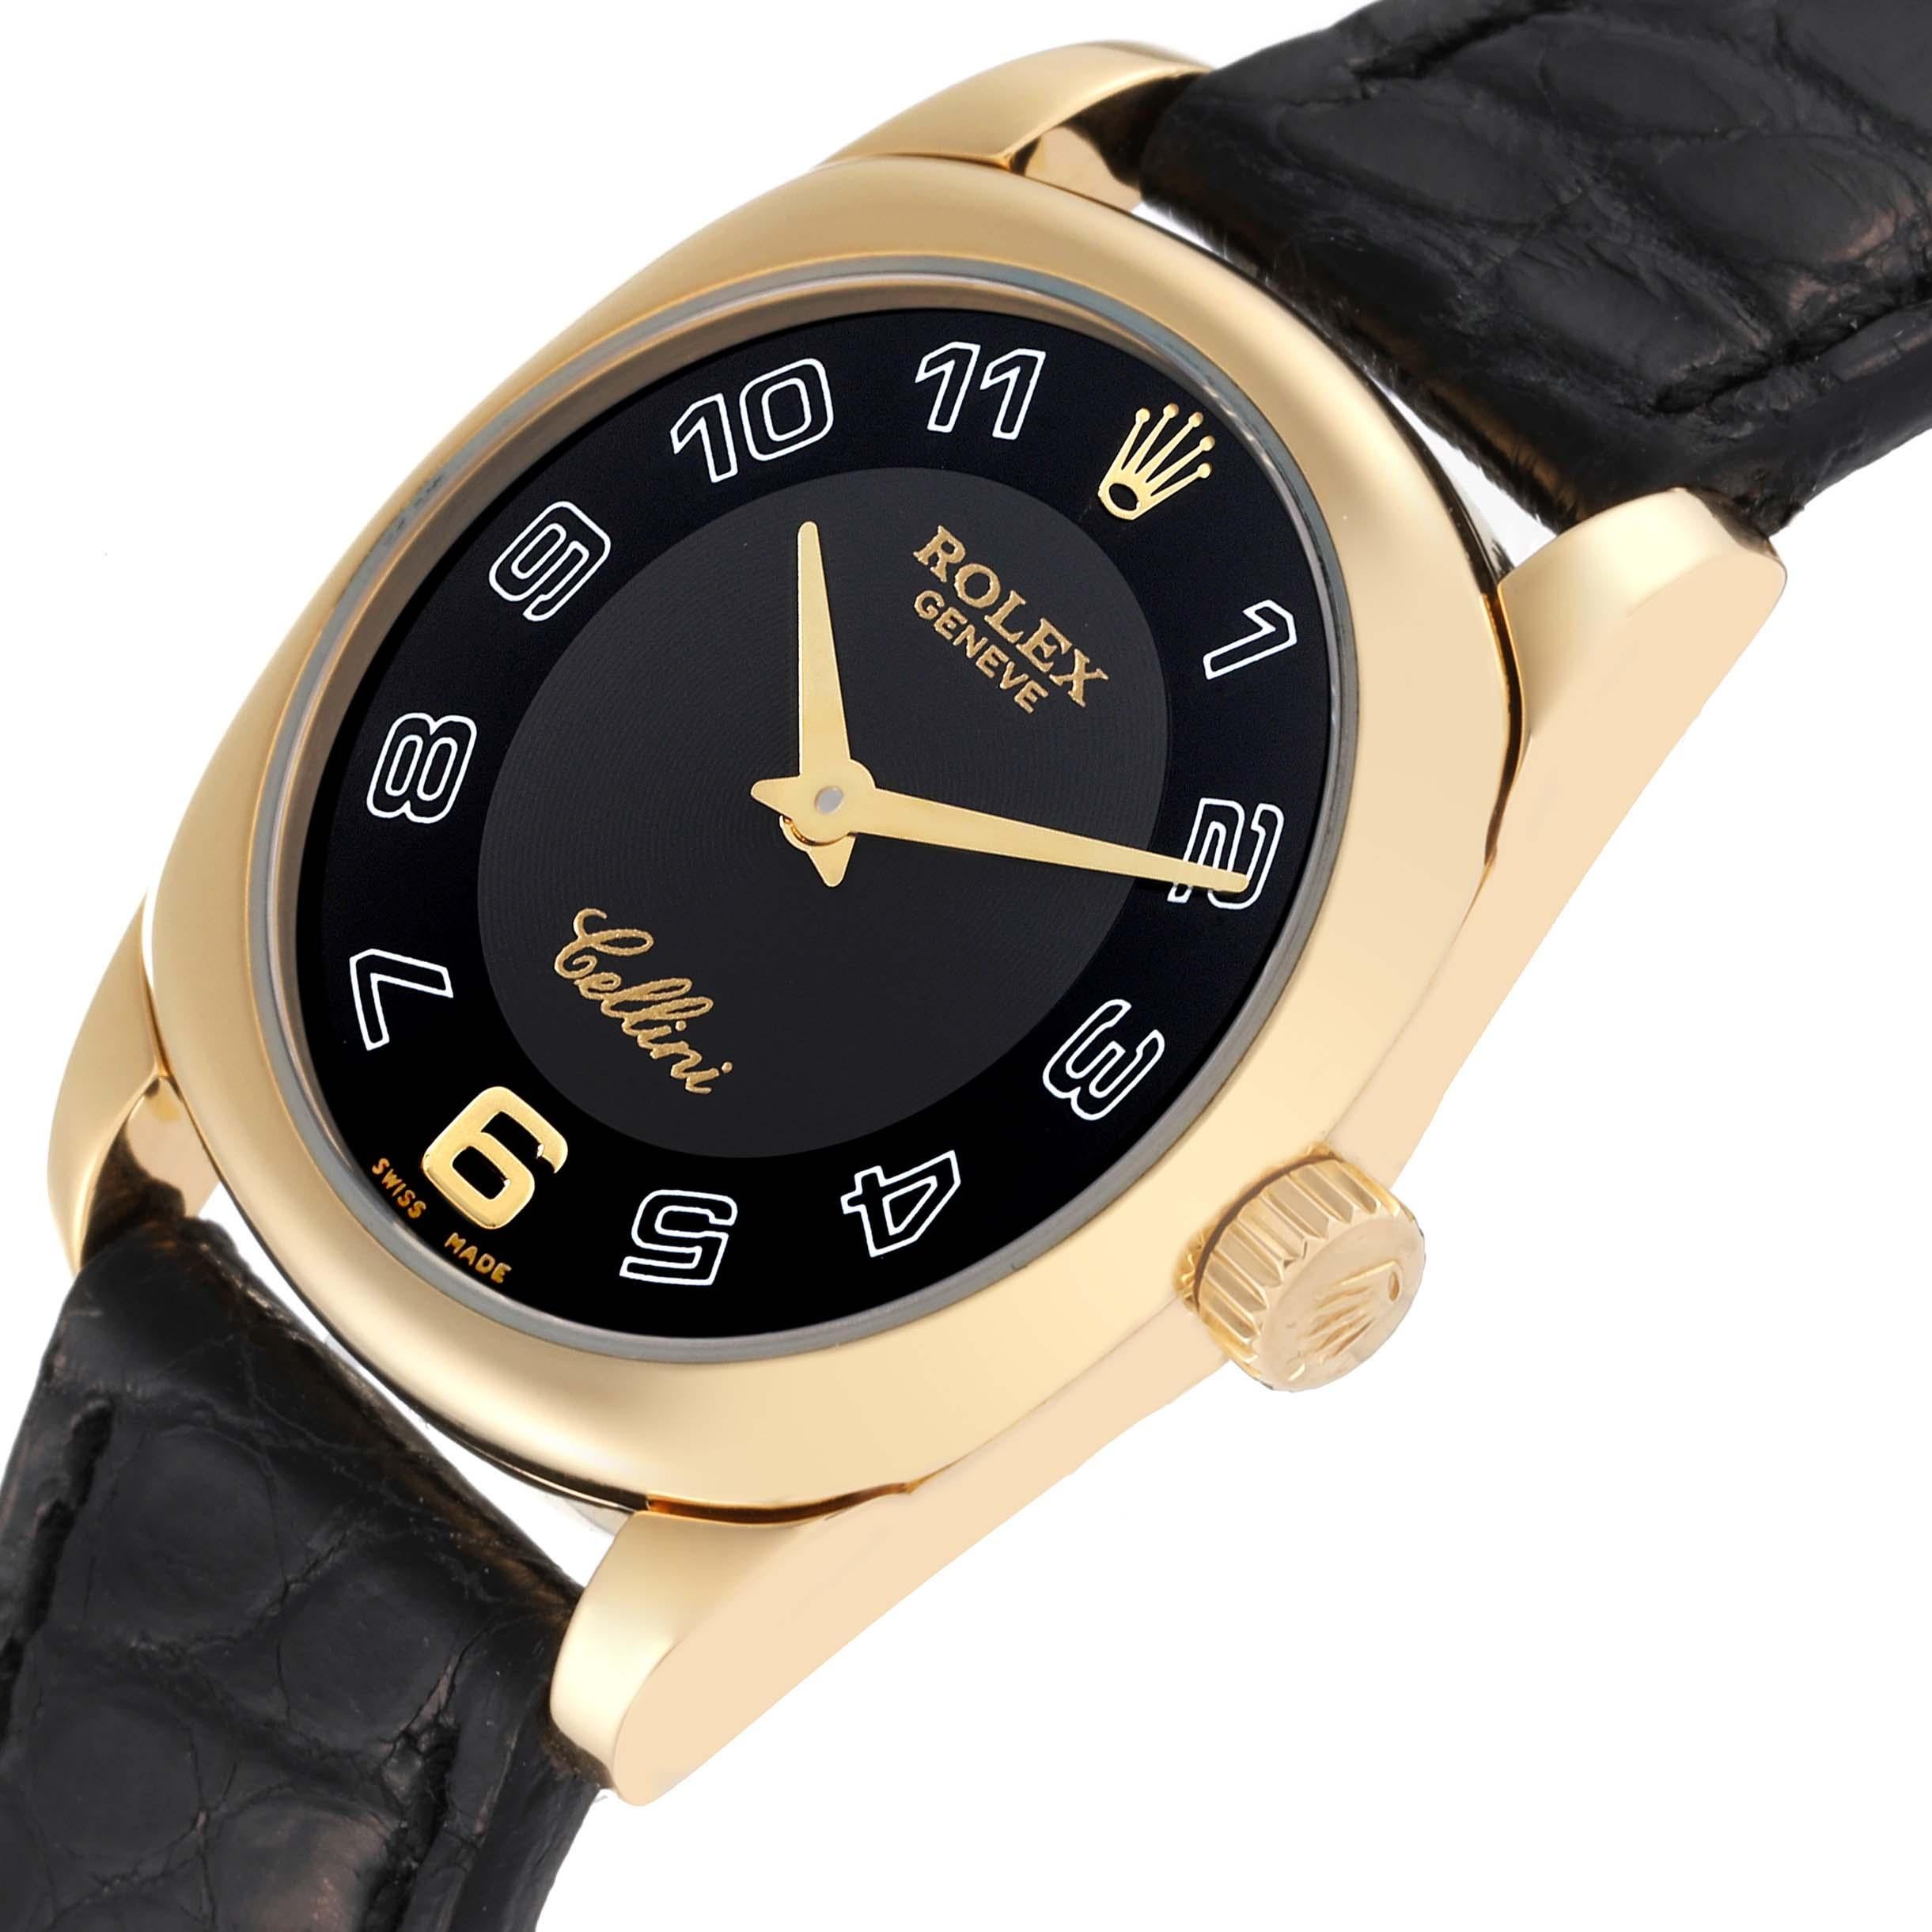 Rolex Cellini Danaos Yellow Gold Black Dial Ladies Watch 6229 Box Papers 1